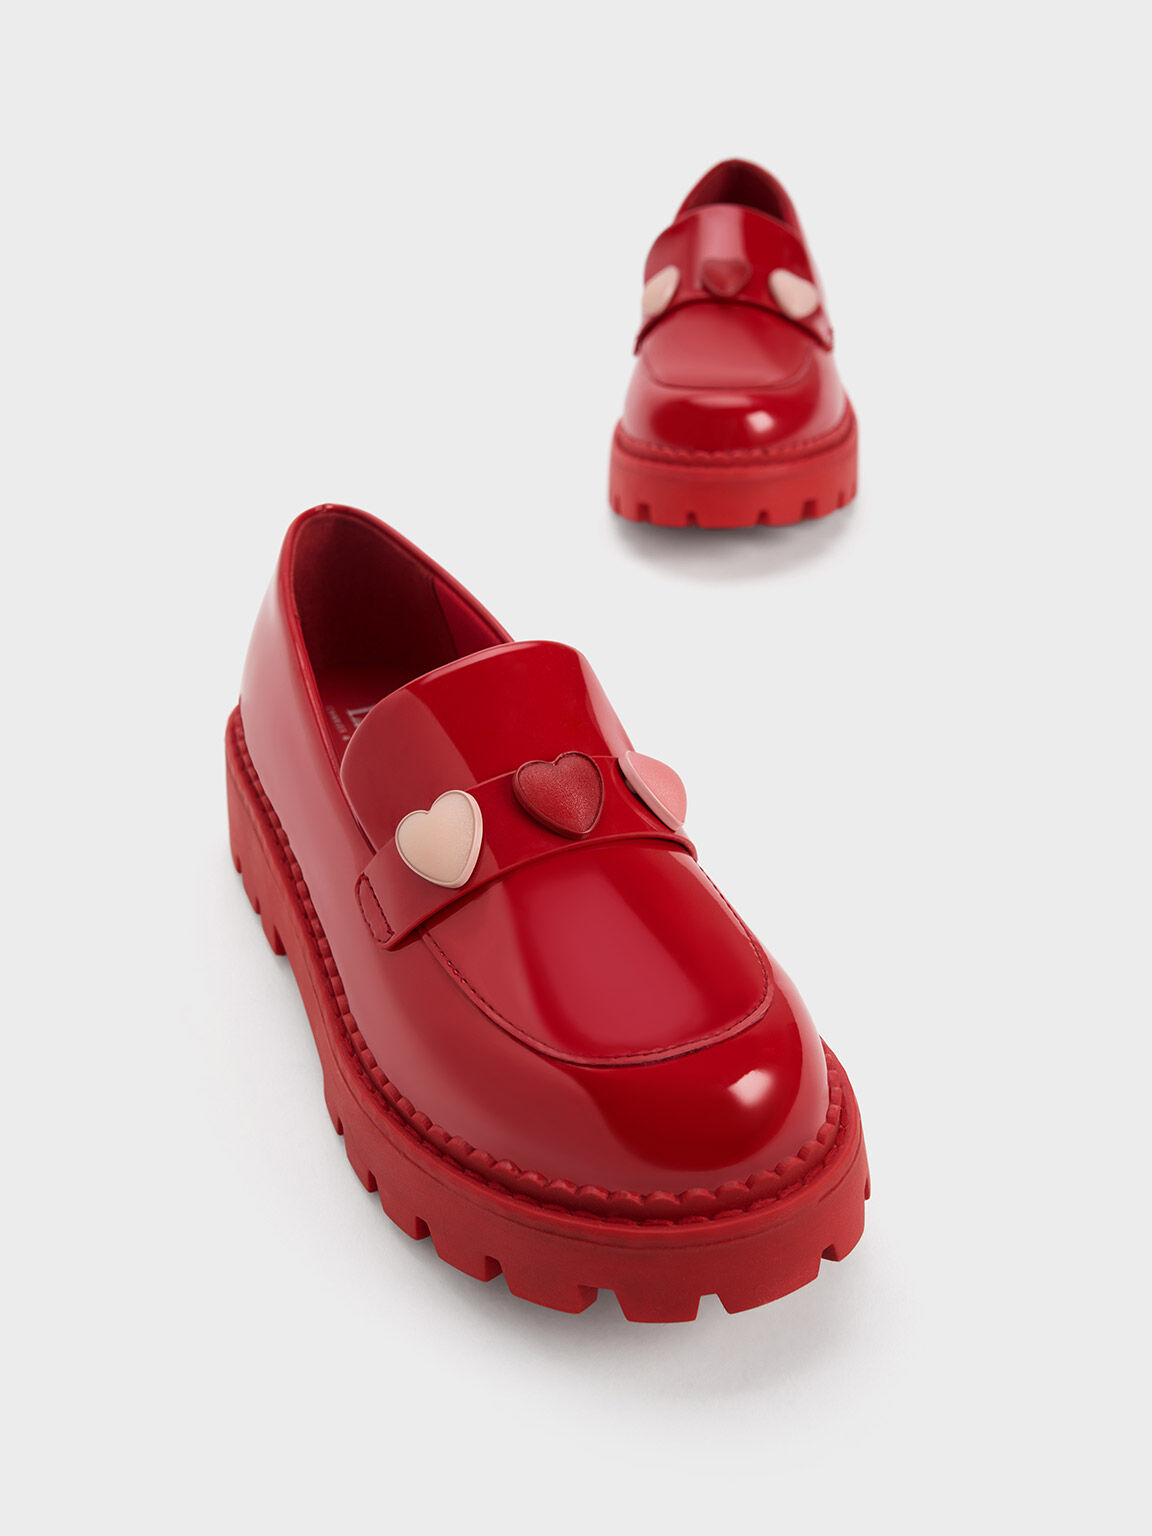 Styling Tips: How to Wear Red Loafers
with Any Outfit